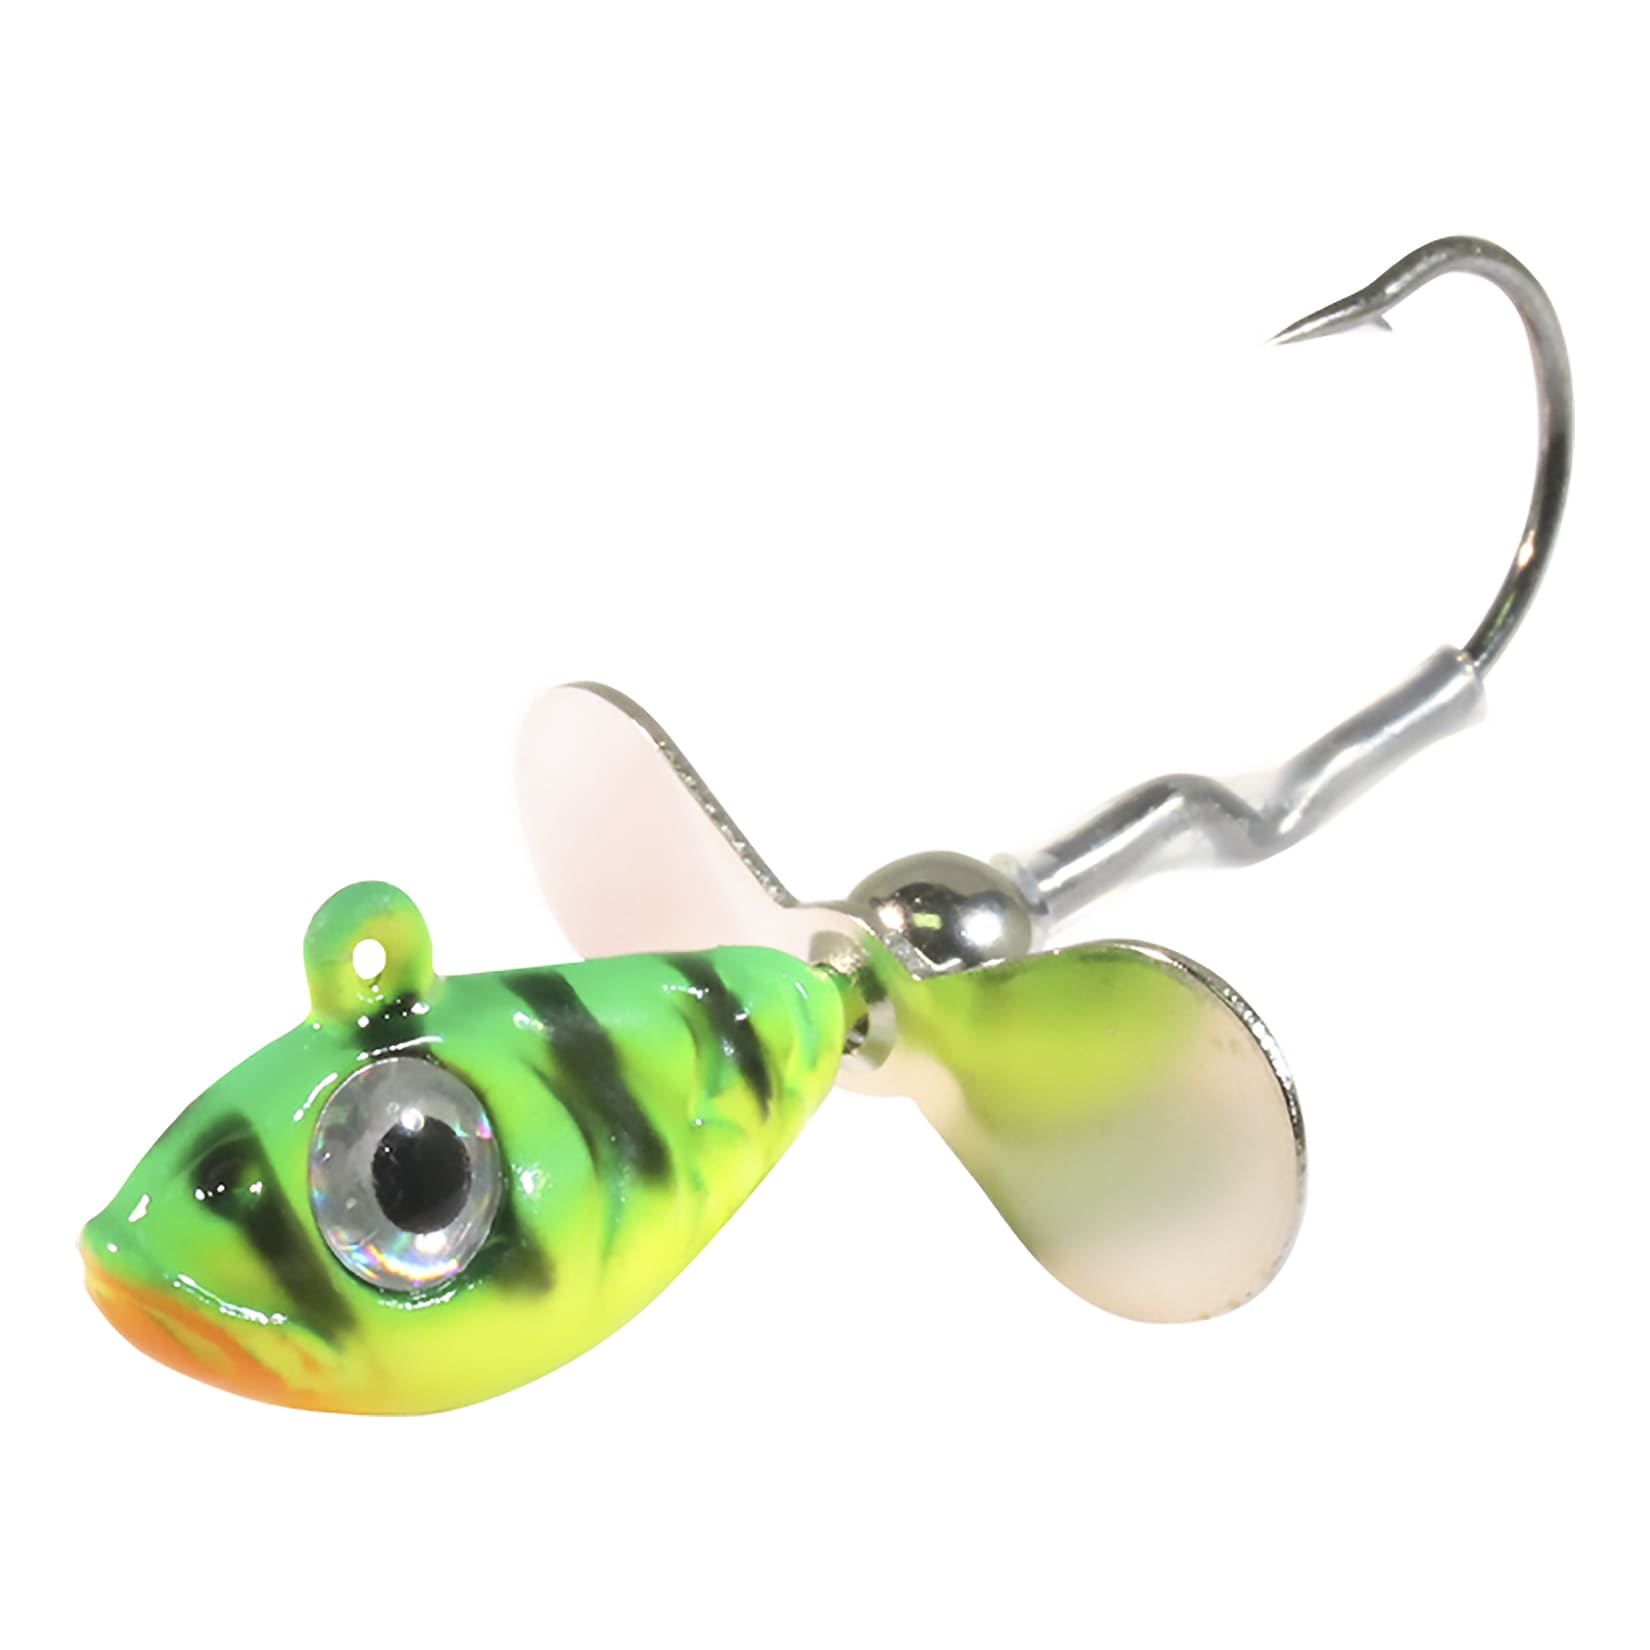 Northland Tackle Thumper Crappie King Spinning Jig Pre-Rigged Plastic Lure  for Crappie Fishing, Assorted Sizes and Colors